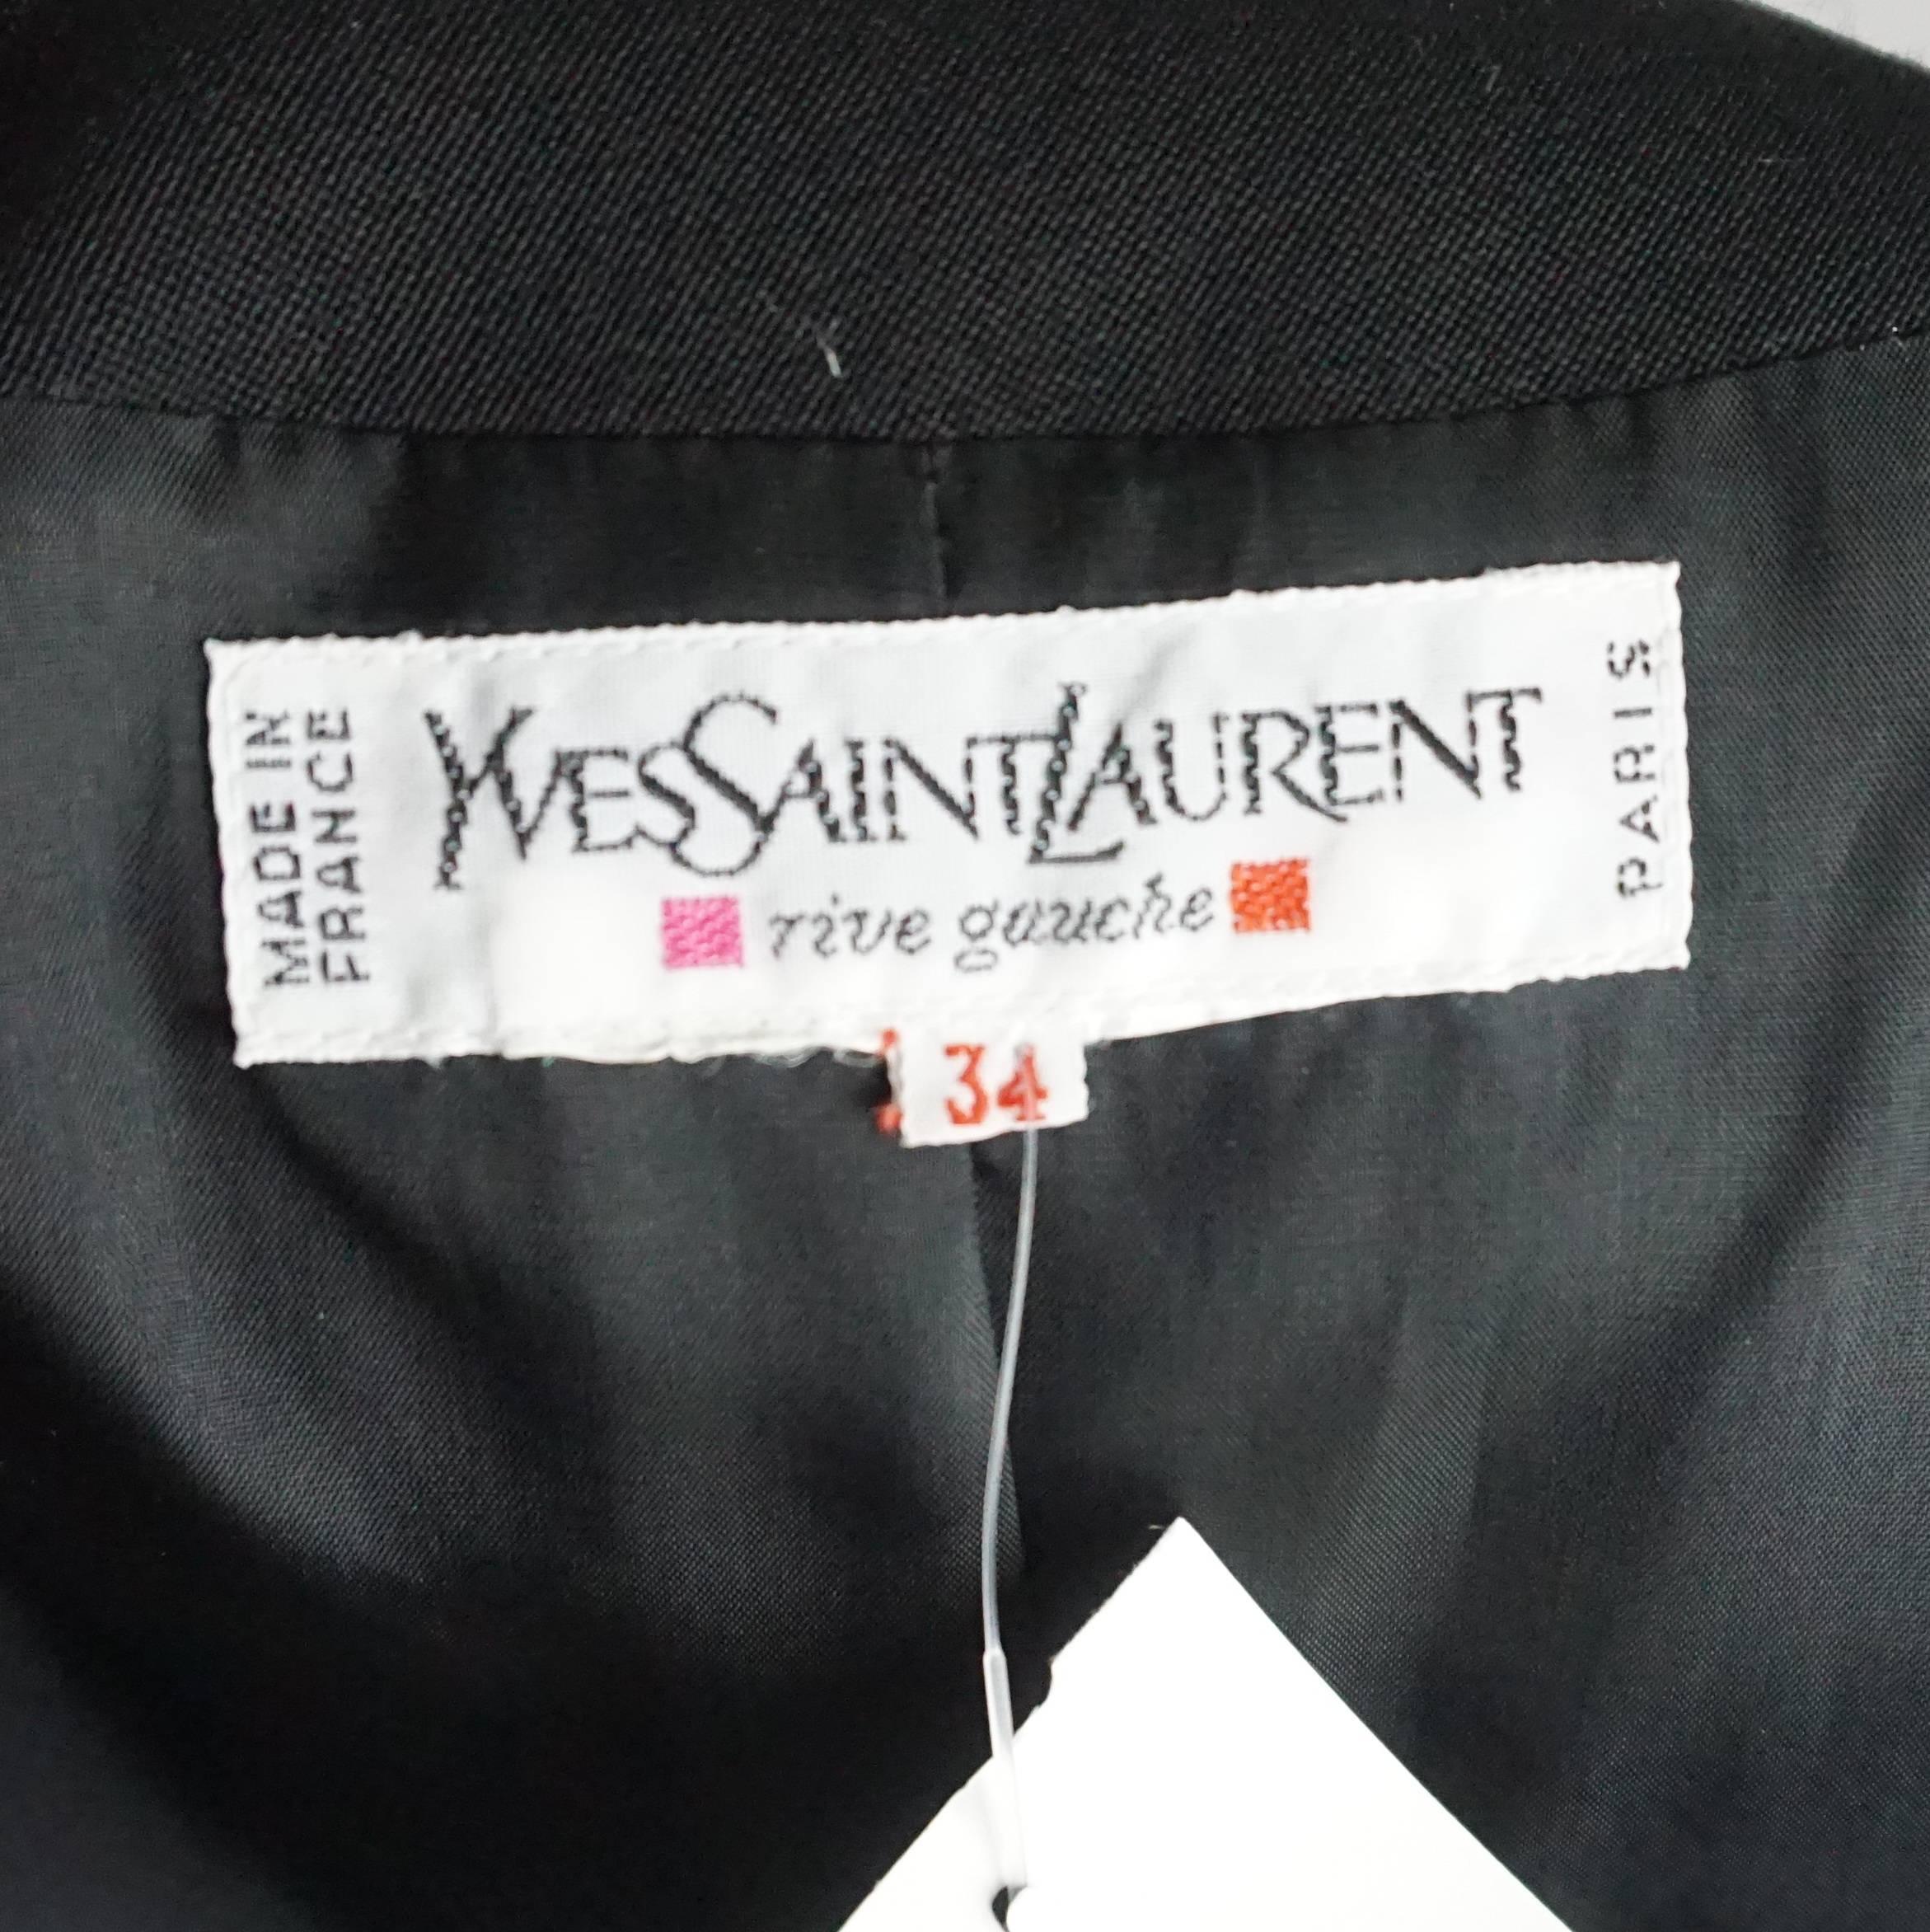 Yves Saint Laurent Black Dress with Bolero Jacket - 34 - Circa 90's In Excellent Condition For Sale In West Palm Beach, FL